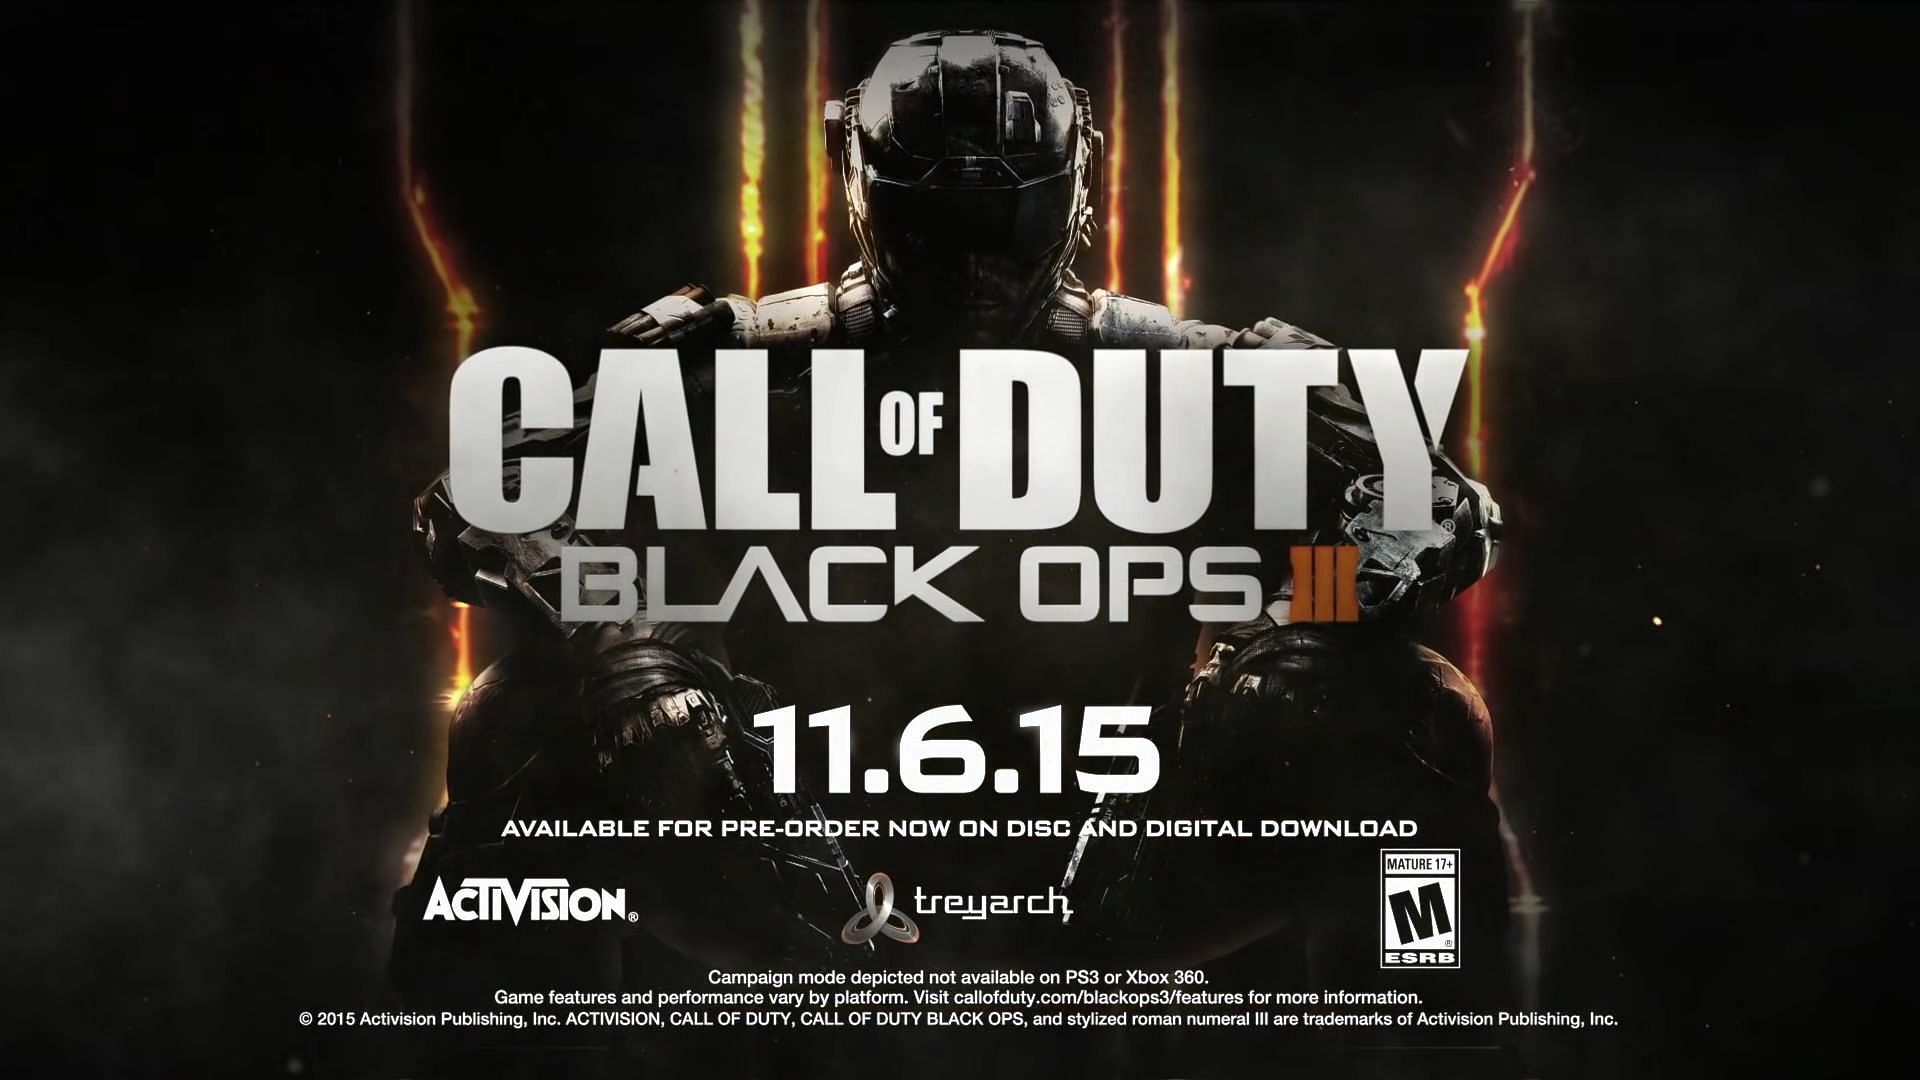 Call of Duty: Black Ops 3 (Image via Activision)